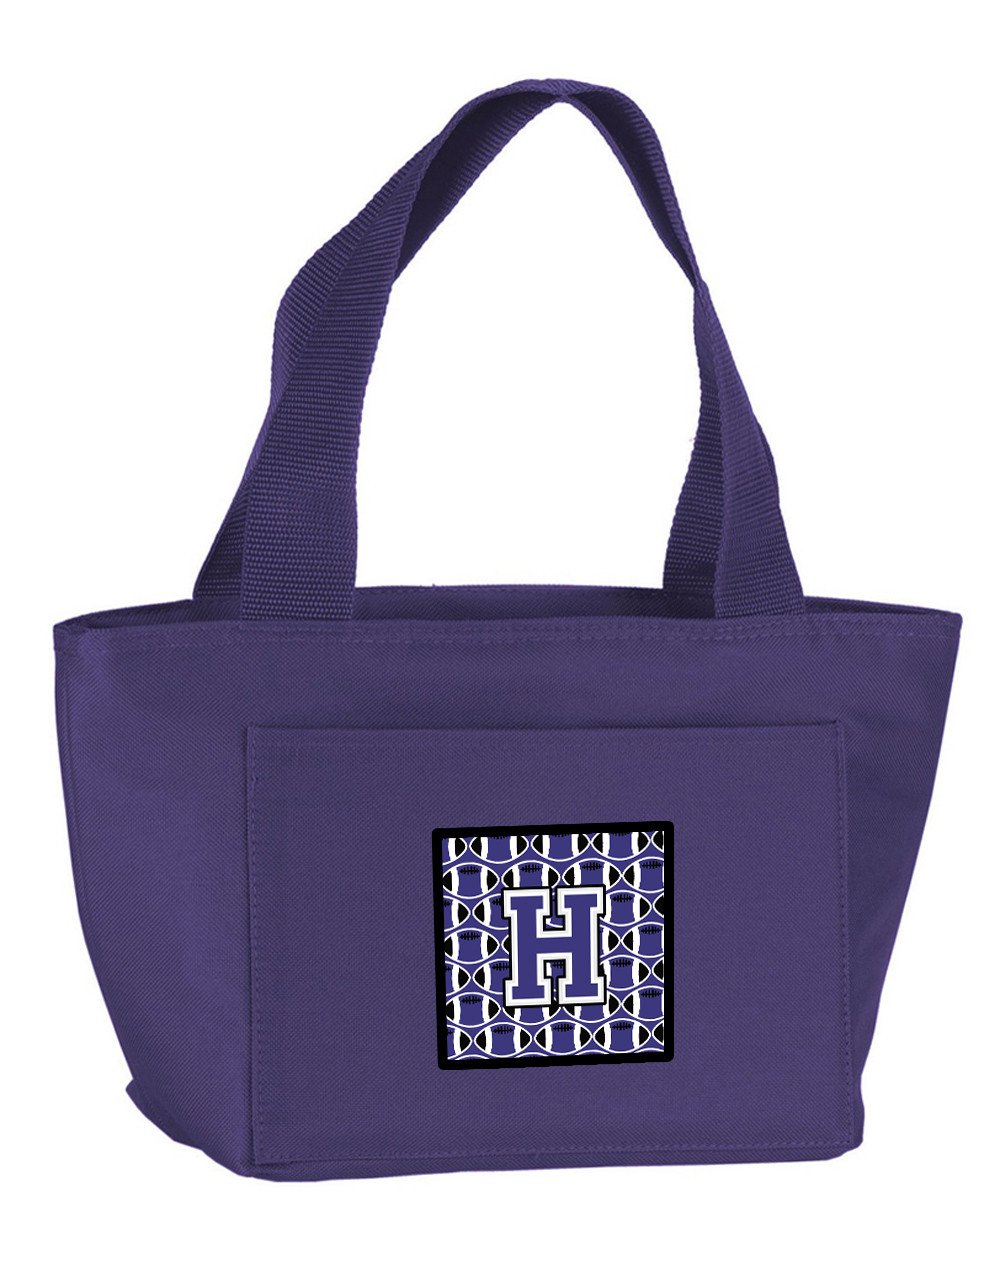 Letter H Football Purple and White Lunch Bag CJ1068-HPR-8808 by Caroline's Treasures